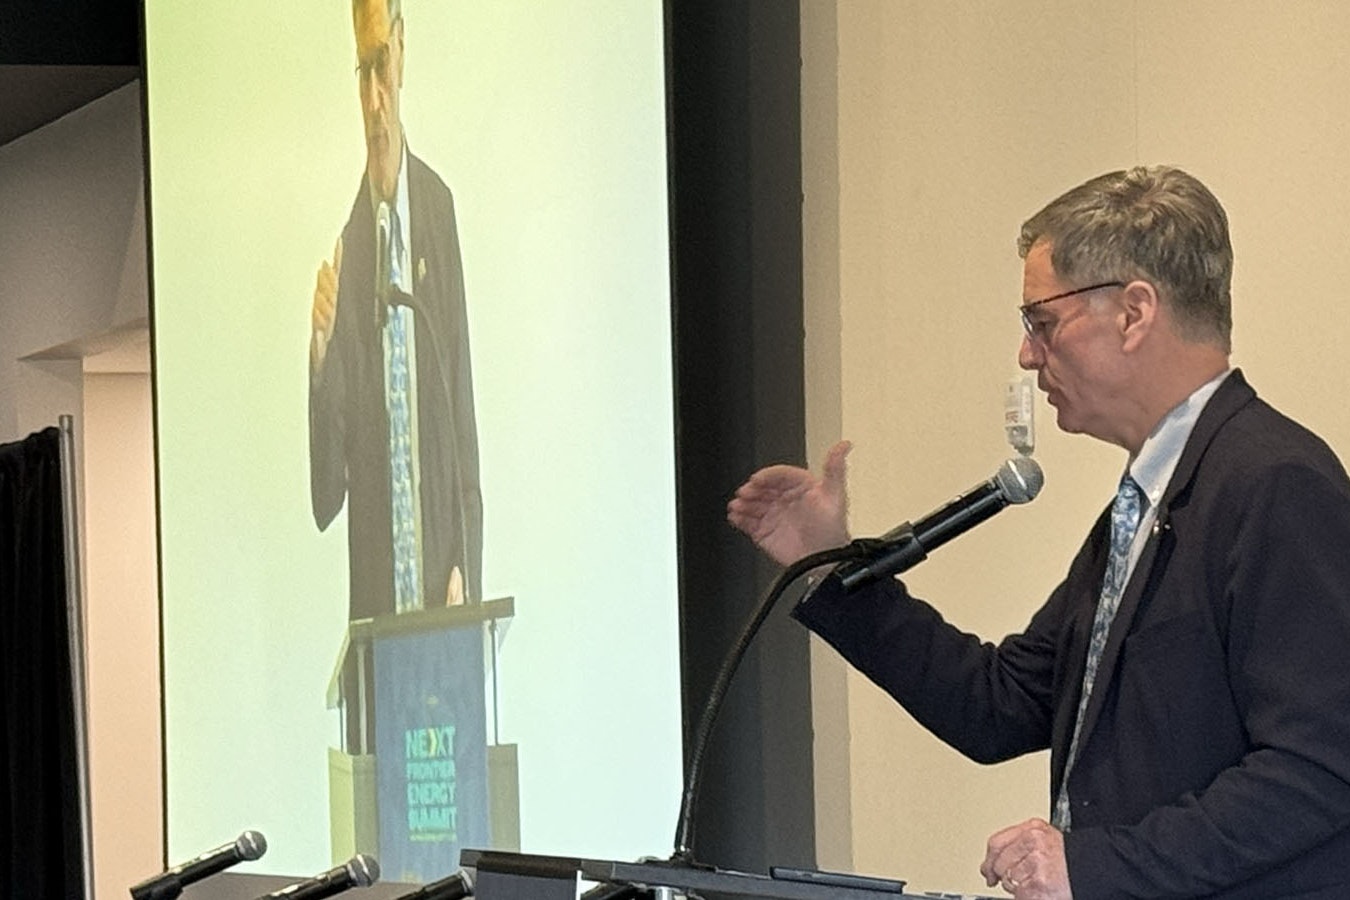 Wyoming Gov. Mark Gordon speaks at an energy summit in Cheyenne on Wednesday where he vowed to fight the federal government’s new regulations designed to limit coal and oil and gas production.